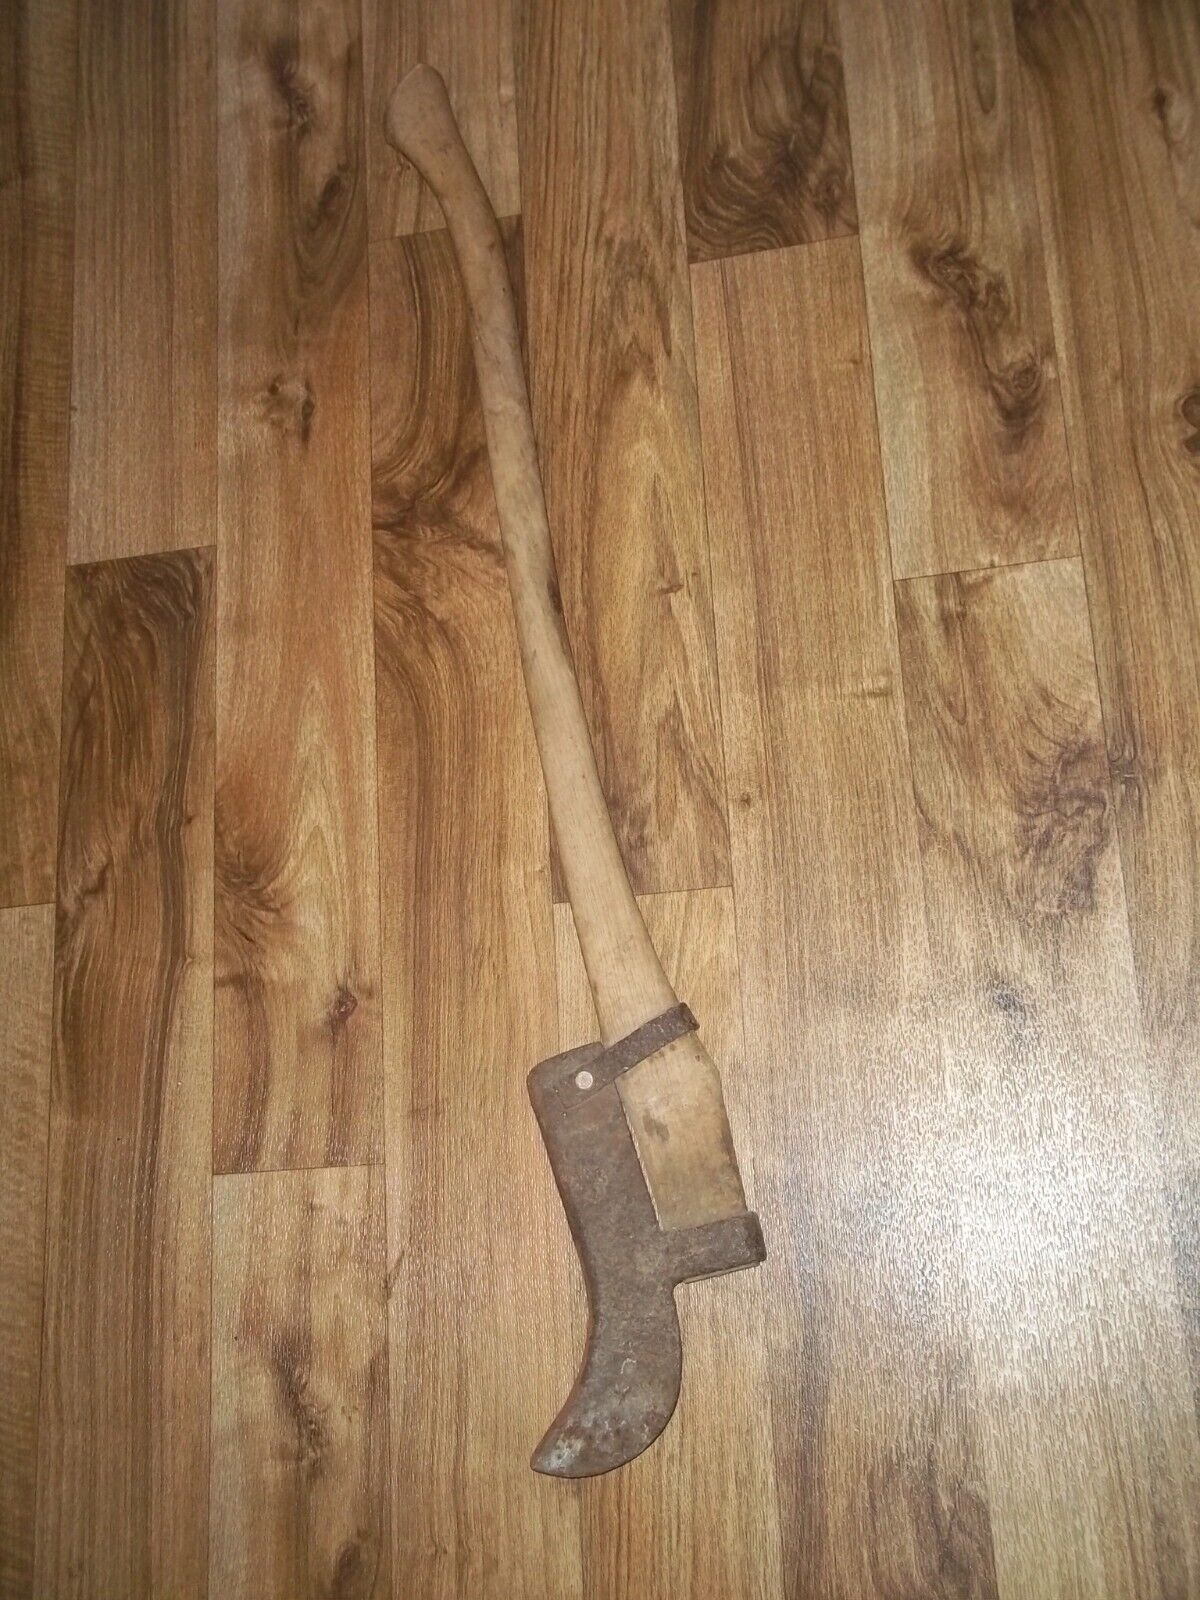 Vintage fire fighting tool brush axe